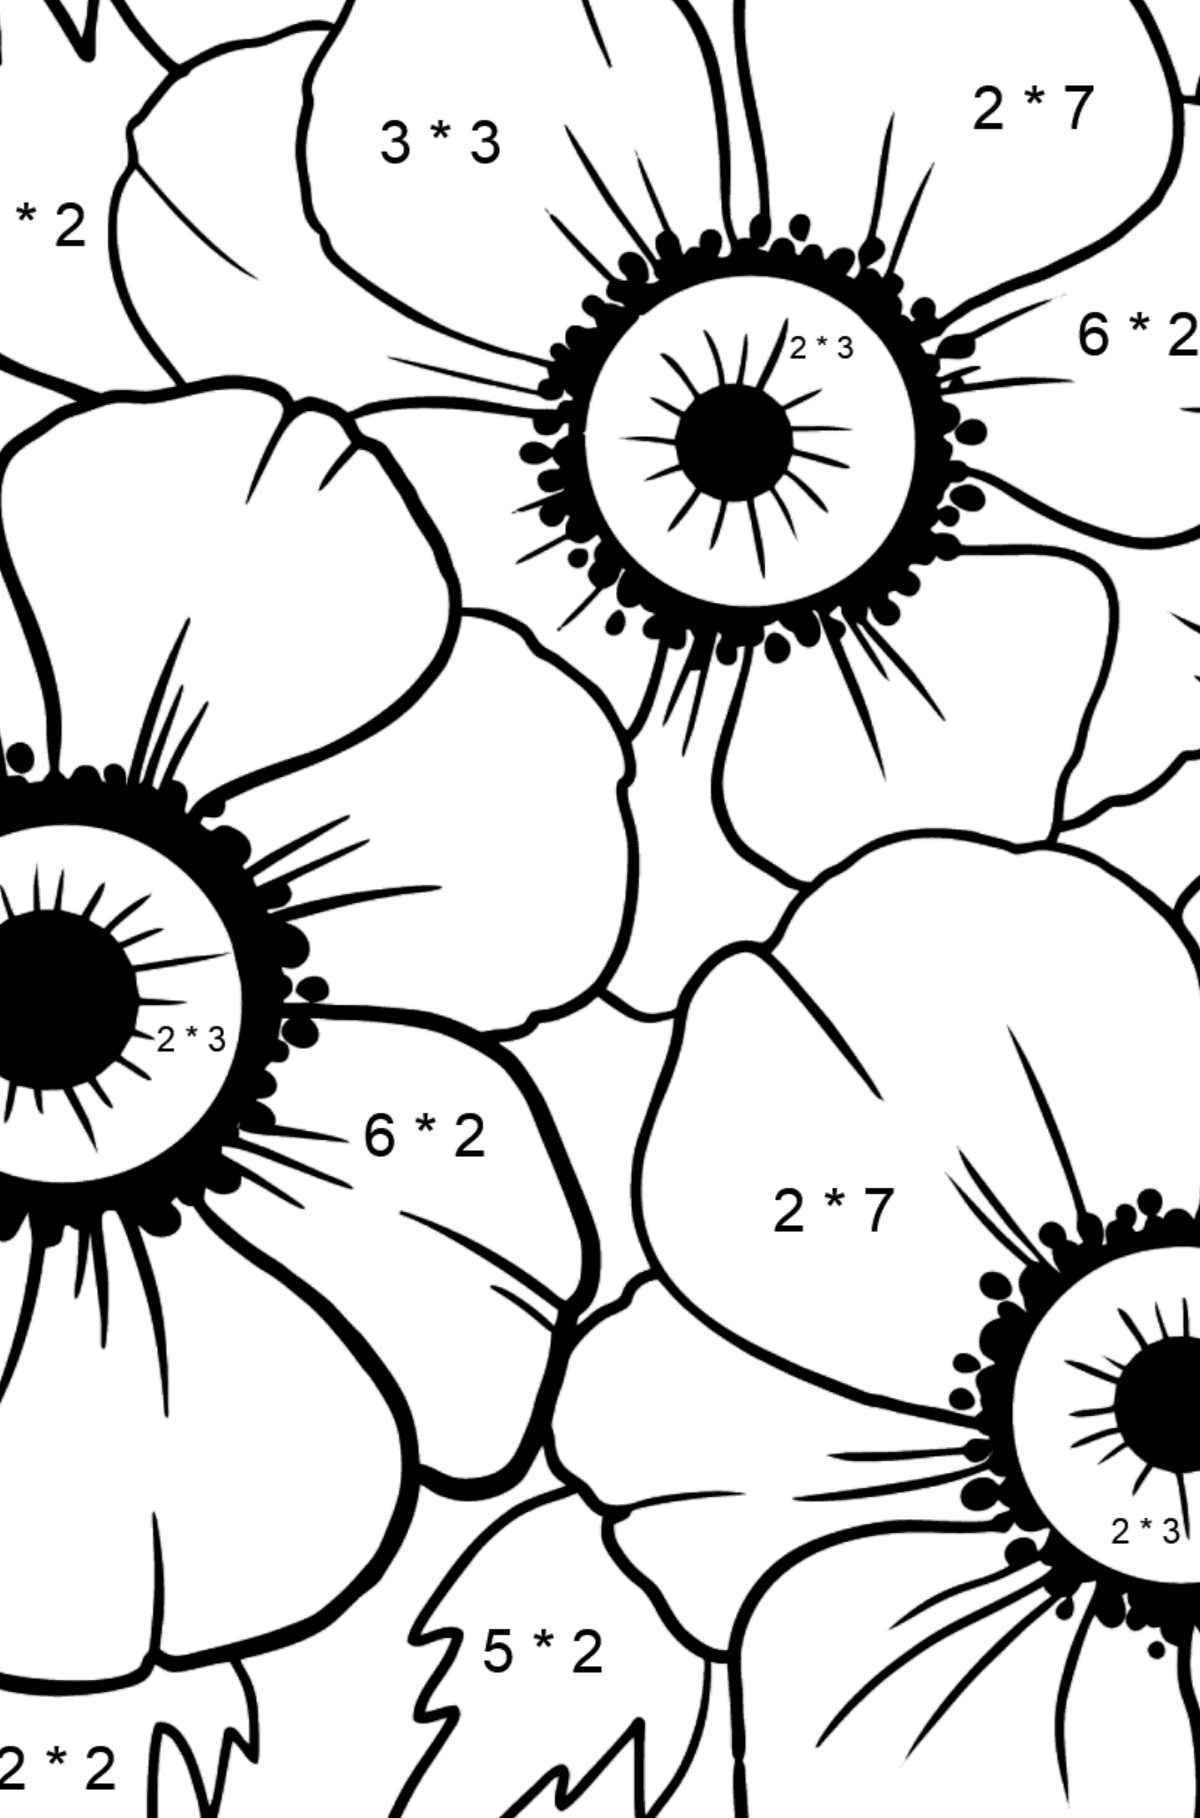 Flower Coloring Page - A Yellow and Orange Anemone Coronaria - Math Coloring - Multiplication for Kids